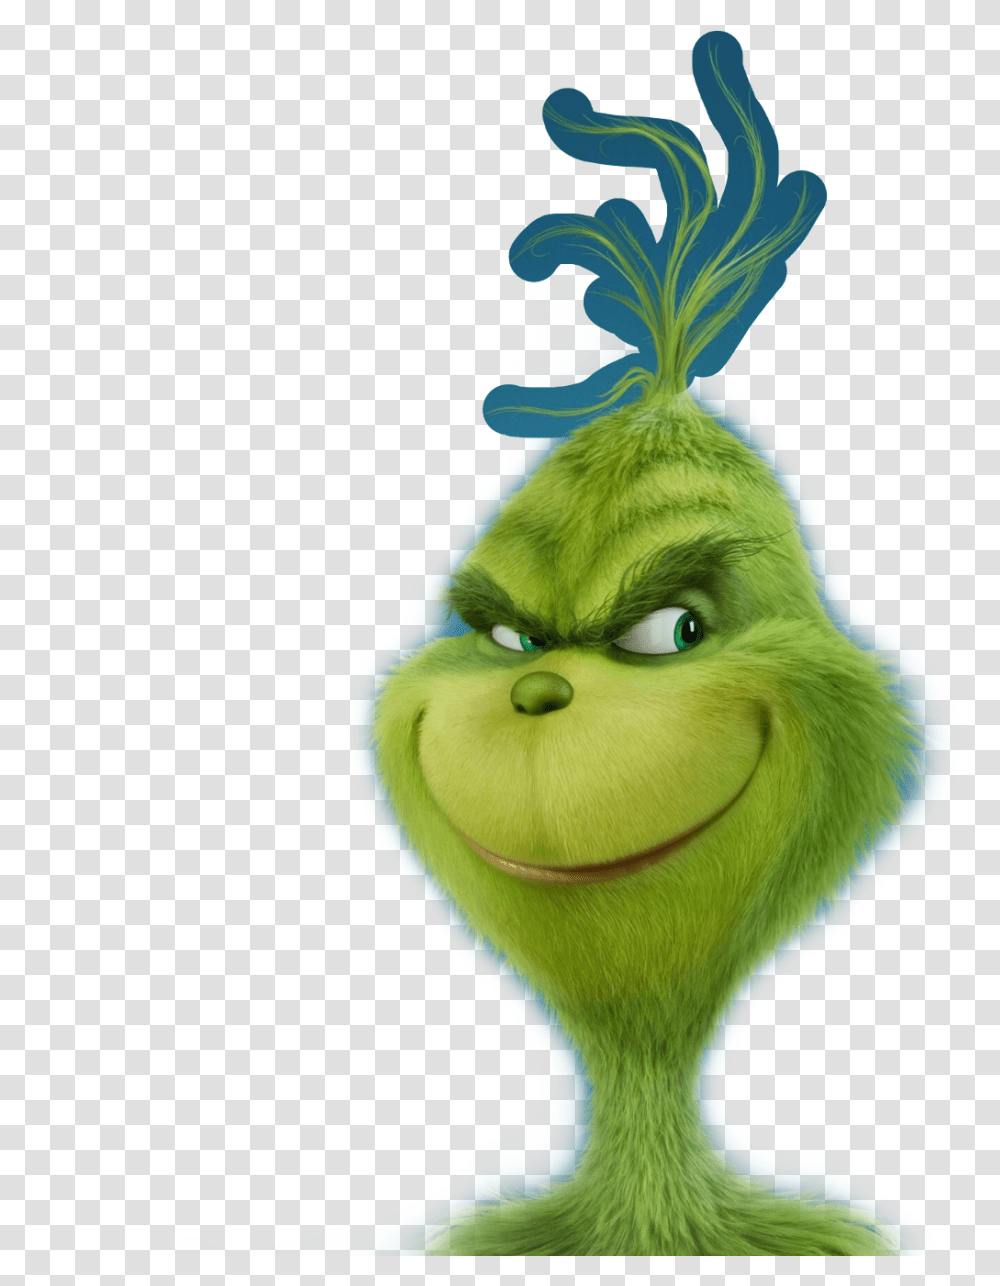 Sticker Grinch Green Xmas Grinch Animated New, Plant, Bird, Animal, Cutlery Transparent Png